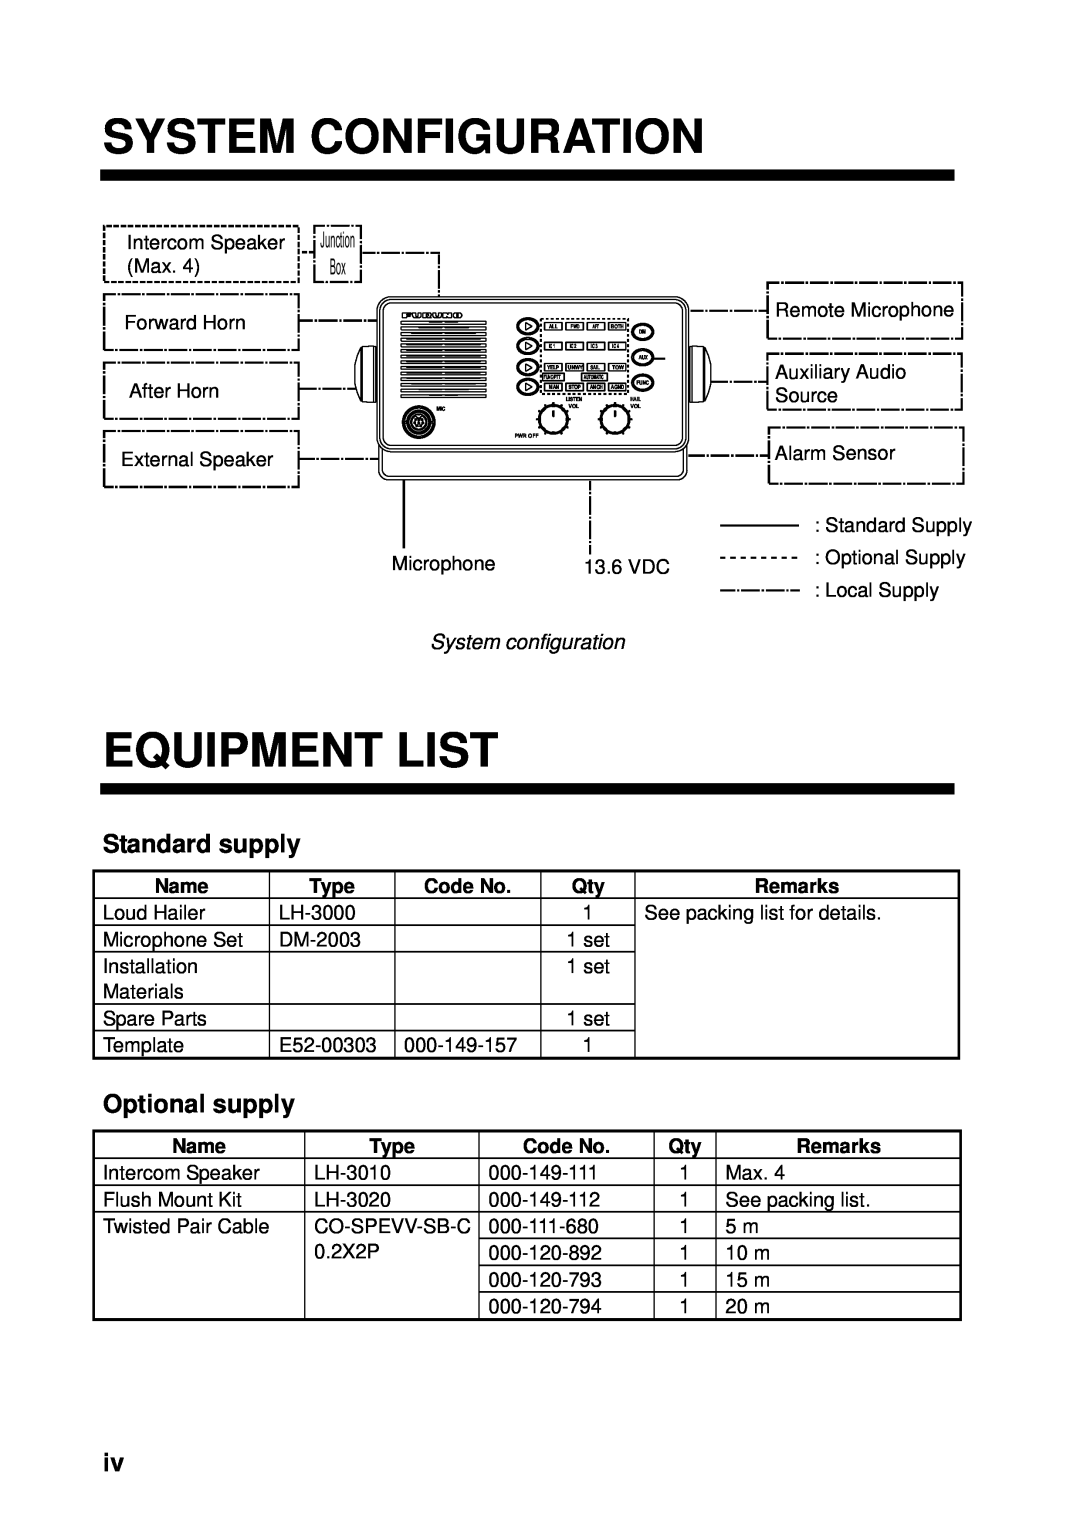 Furuno LH-3000 System Configuration, Equipment List, Standard supply, Optional supply, Junction Box, Name, Type, Code No 